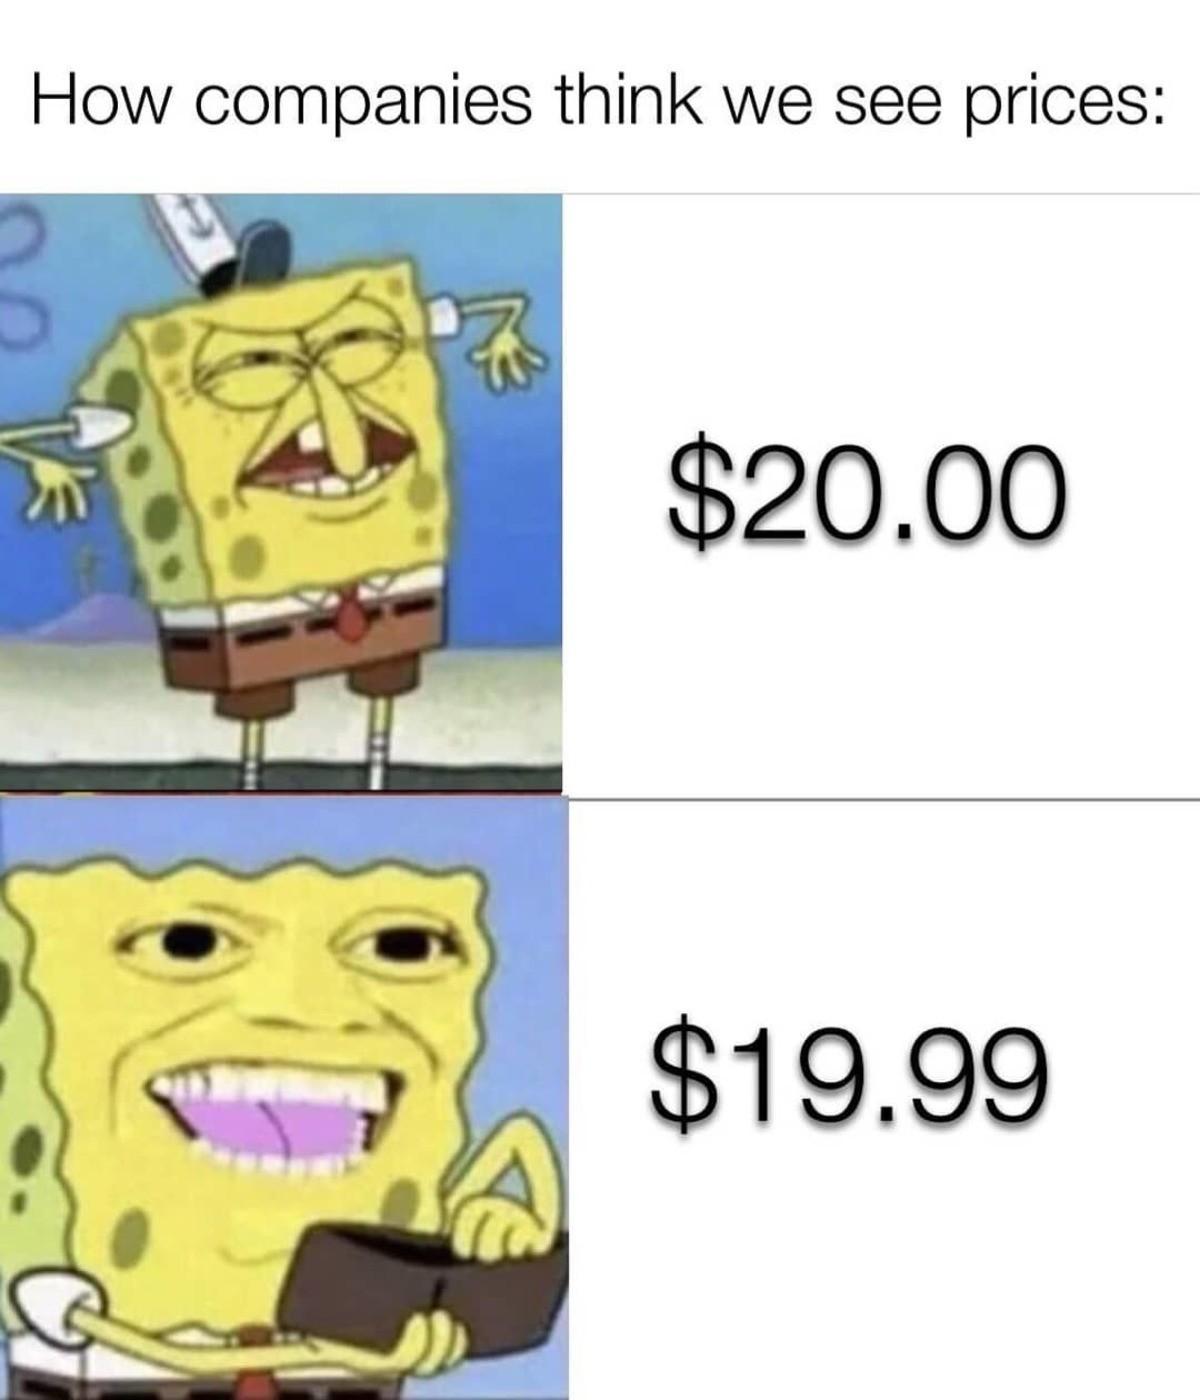 How companies think we see prices:
$20.00
$19.99